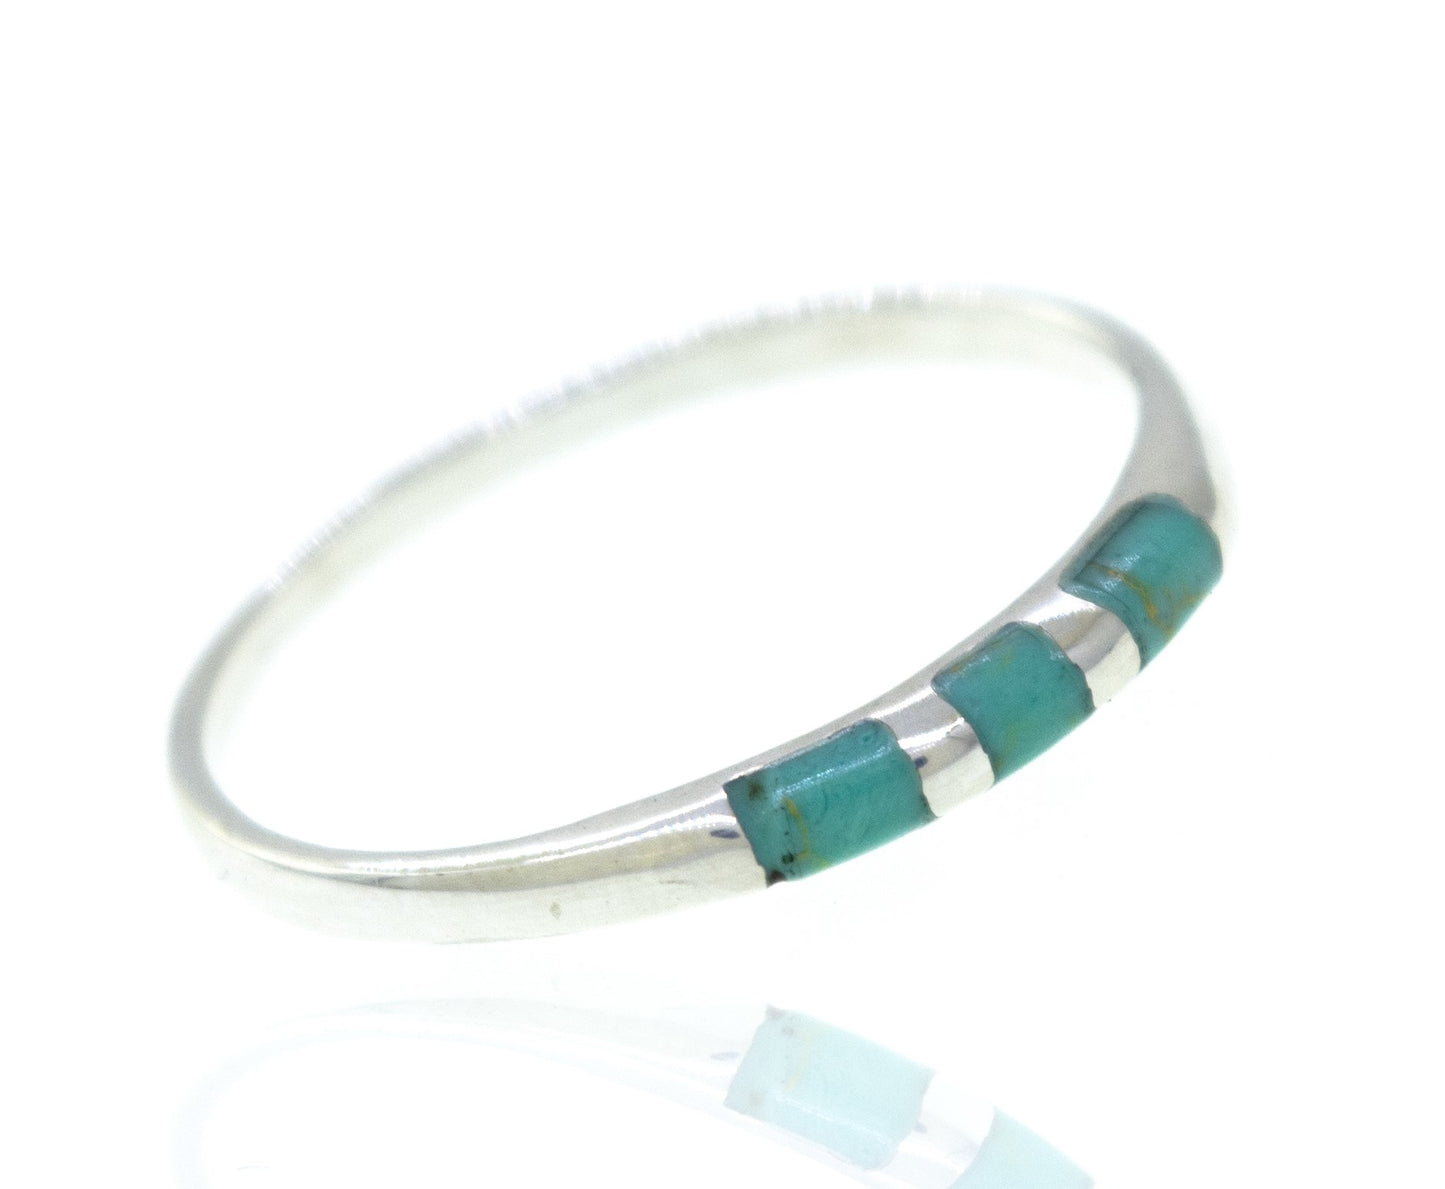 A Striped Turquoise Ring made of .925 silver.